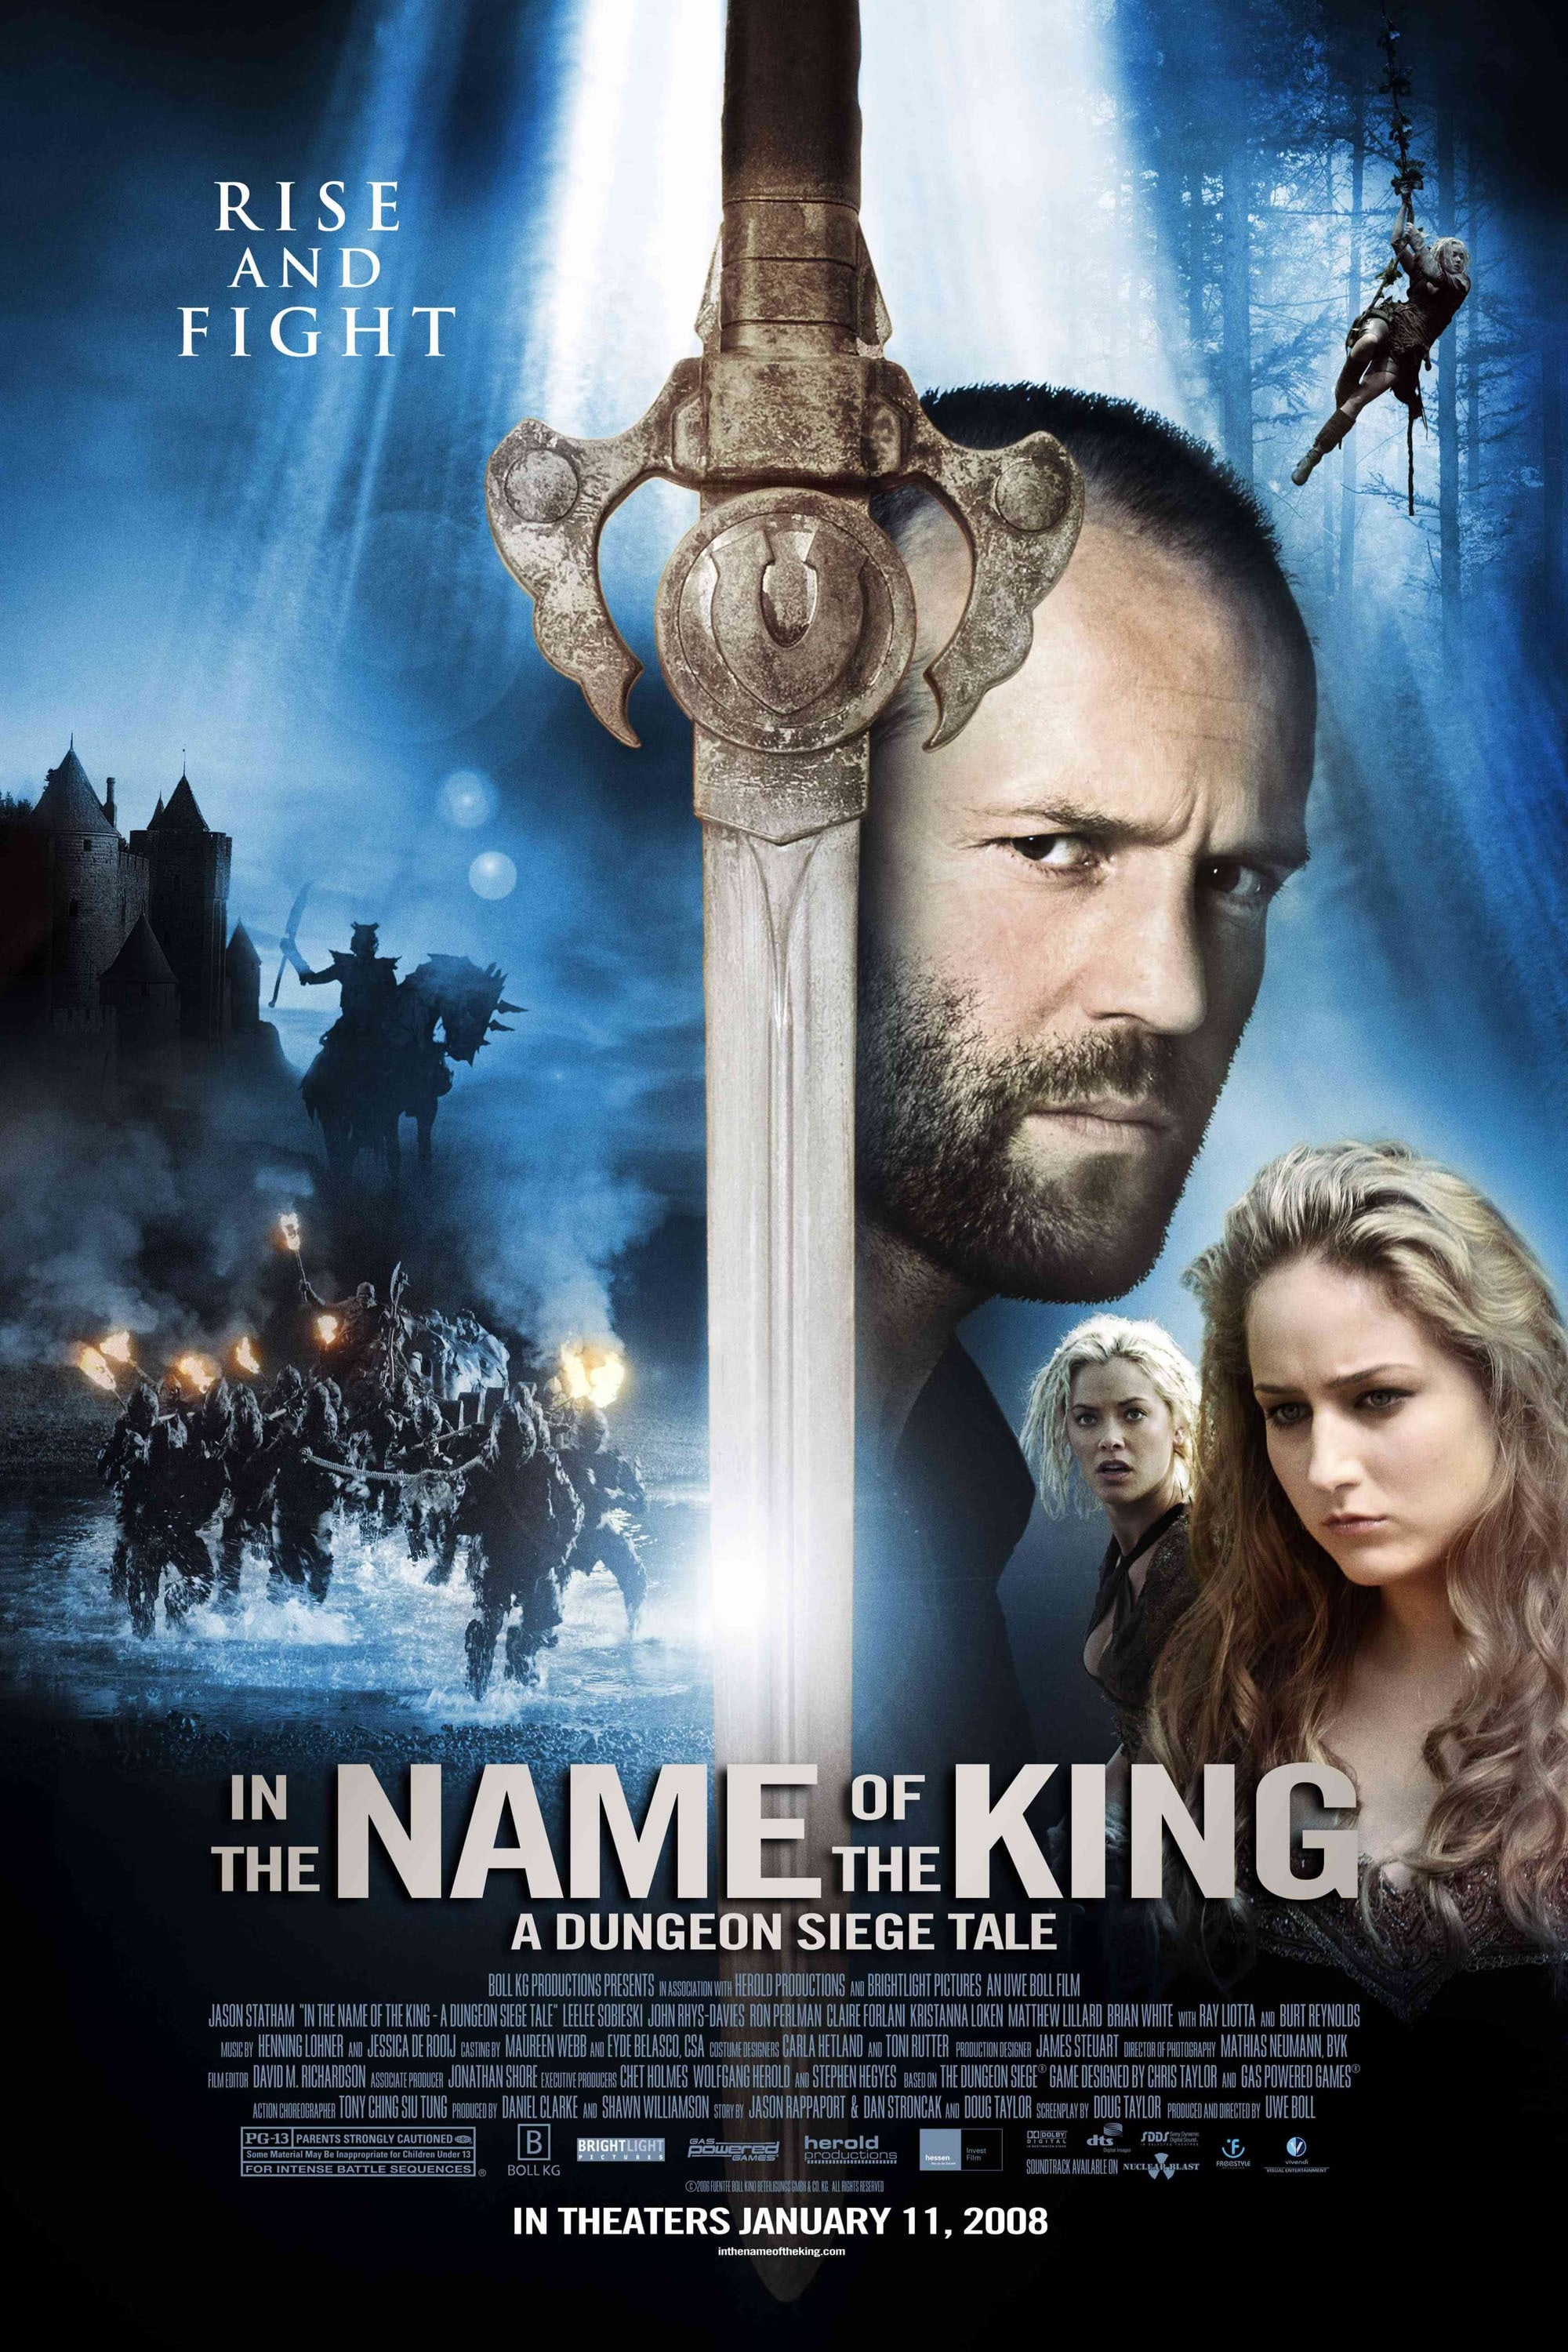 EN - In The Name Of The King: A Dungeon Siege Tale (2007) JASON STATHAM